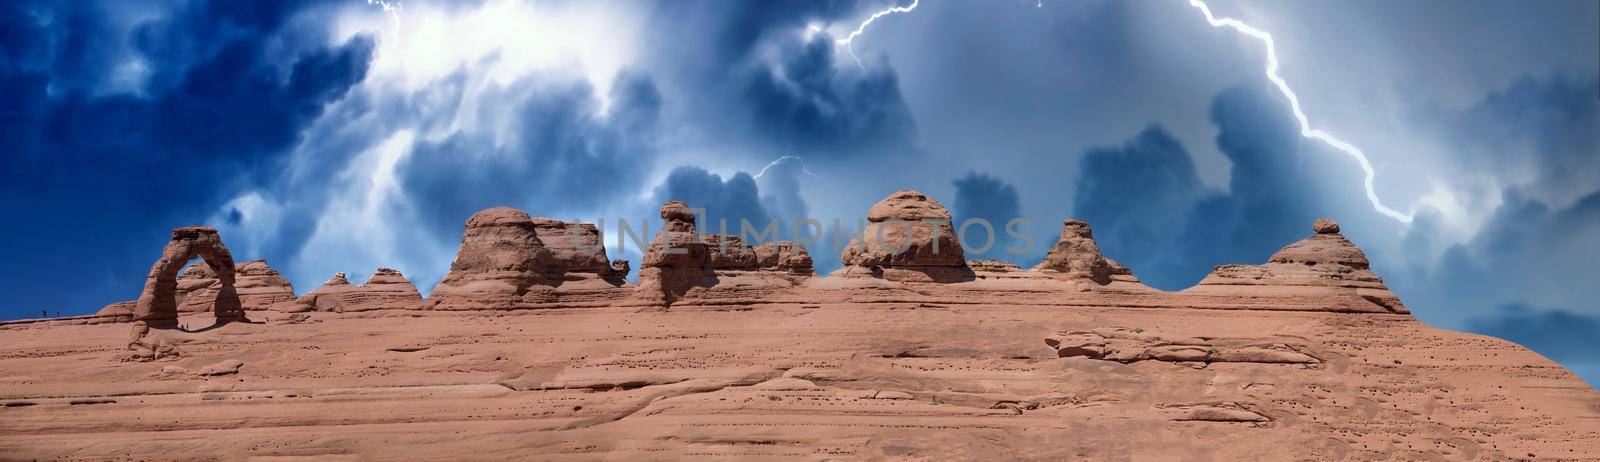 Delicate Arch panoramic view, Arches National Park. High resolution image of rock formations during a storm.